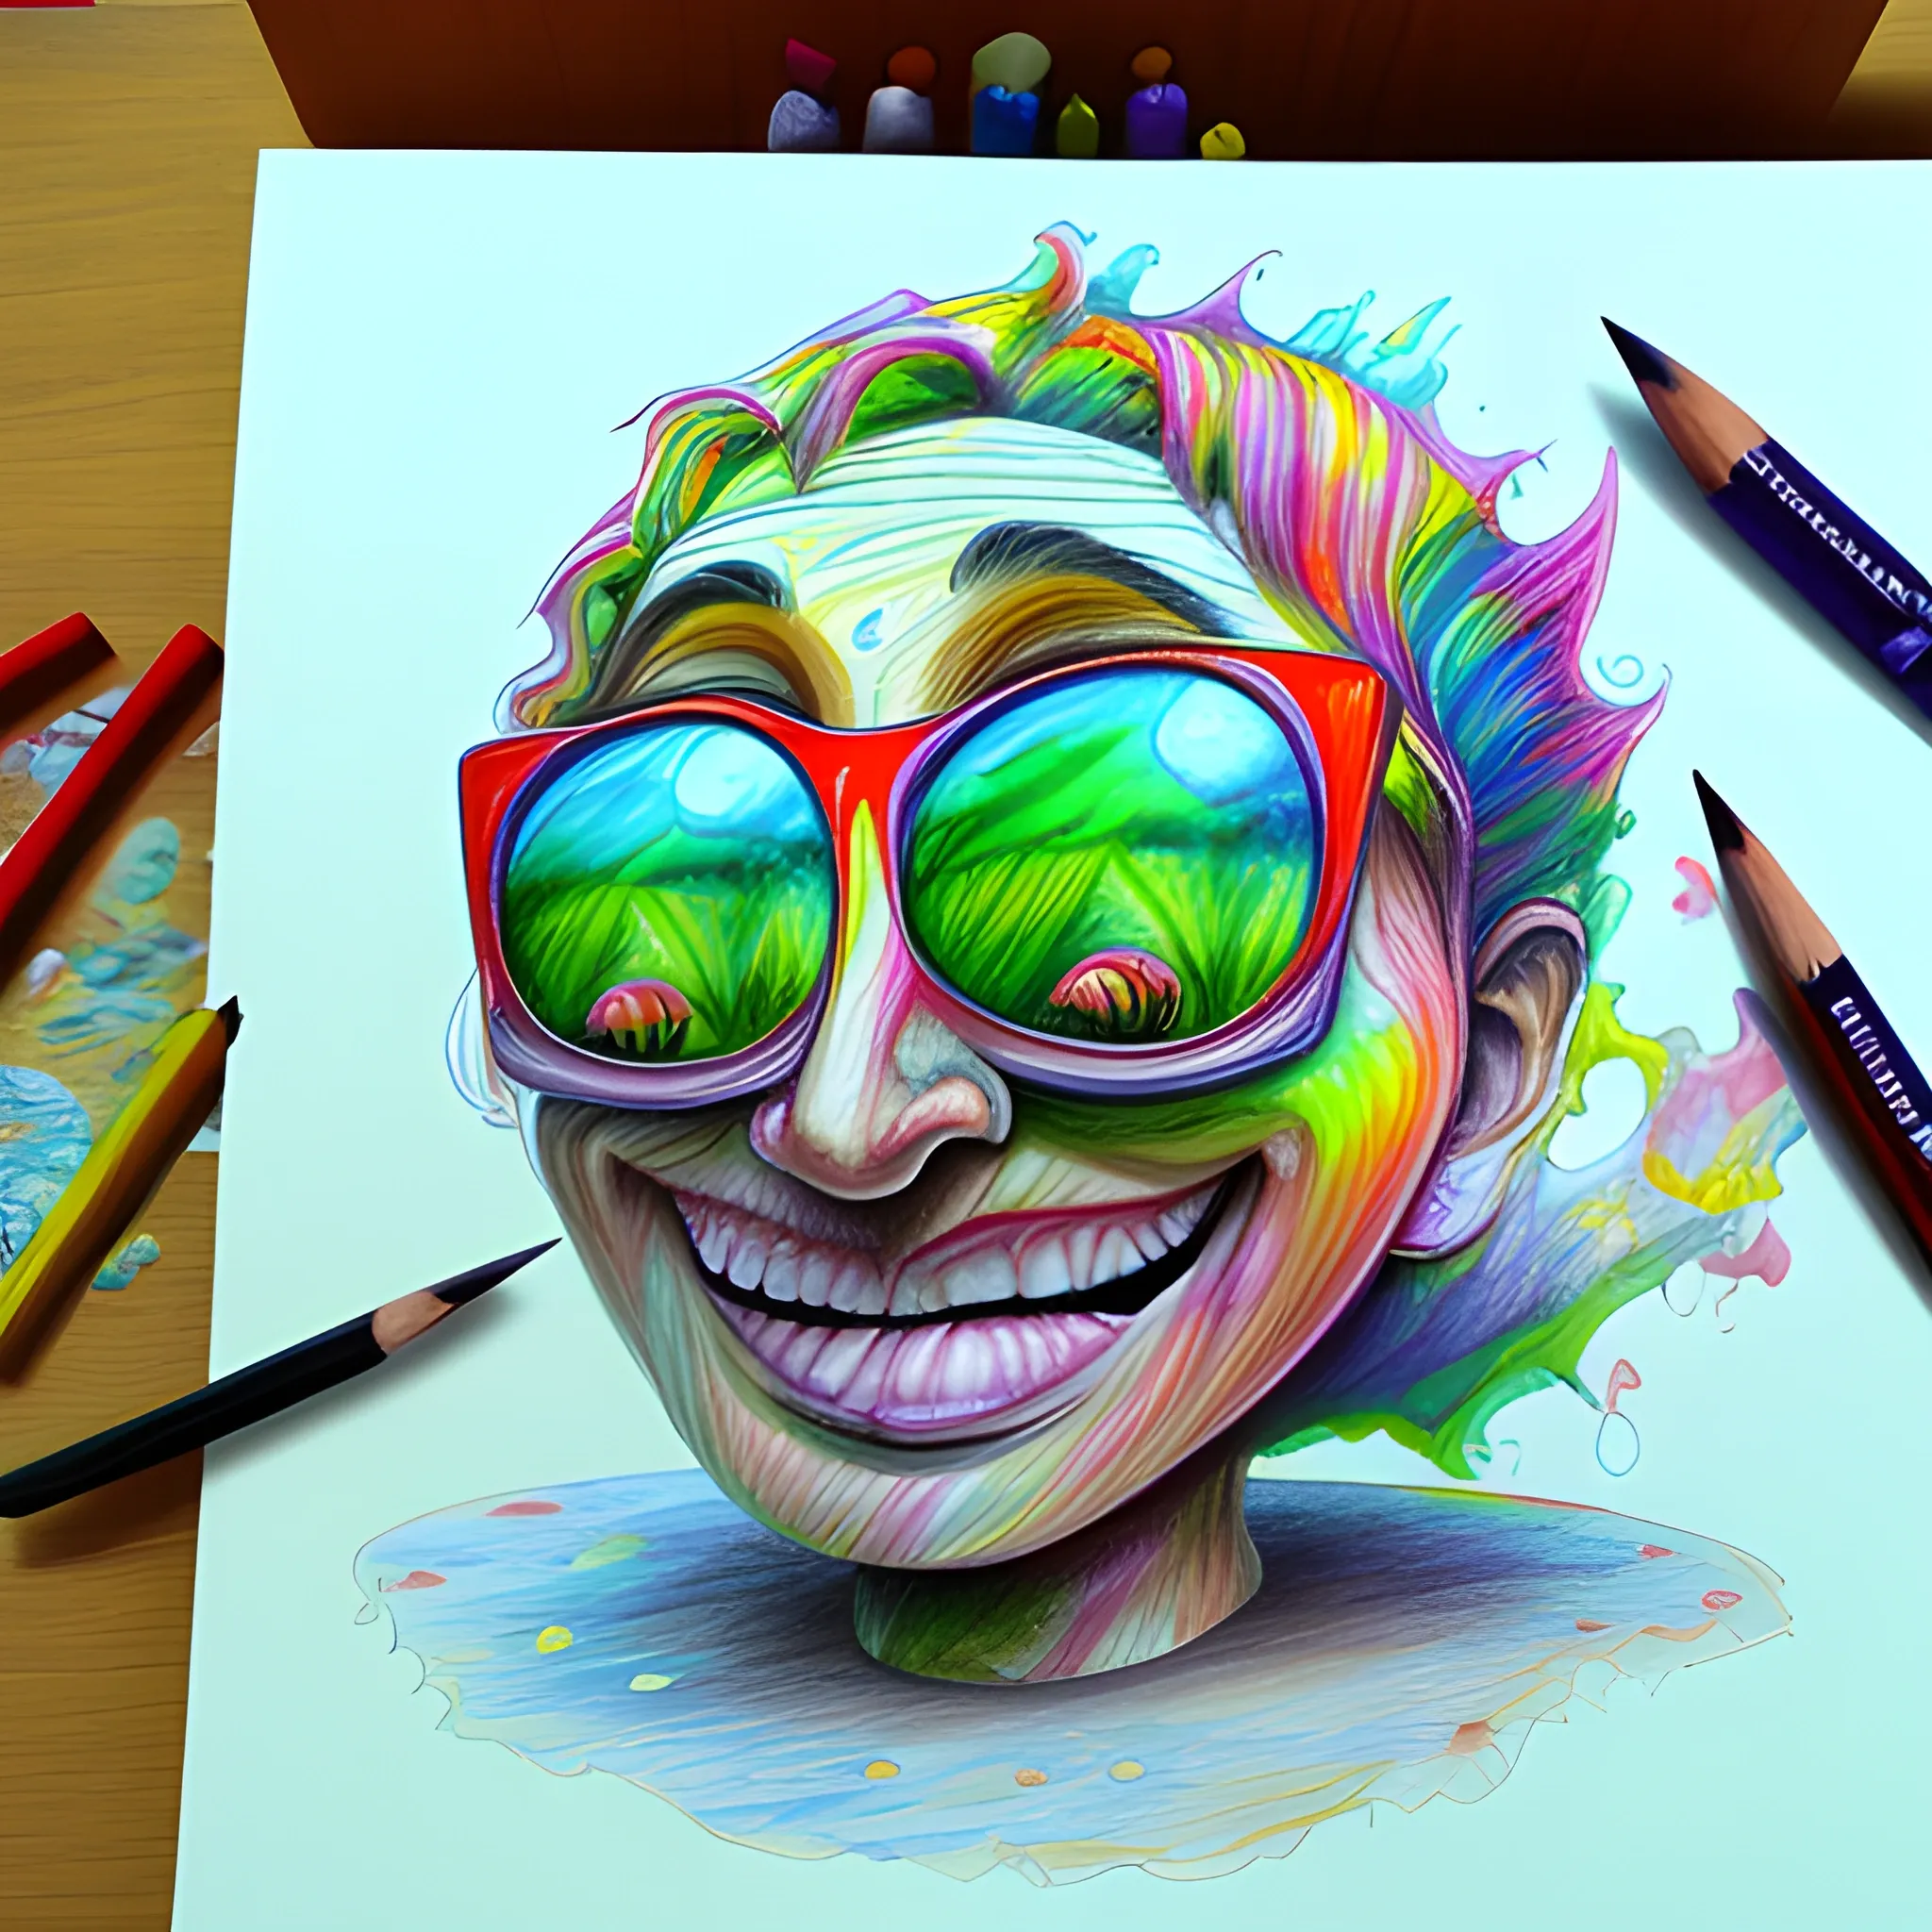 , Trippy, Cartoon, 3D, Pencil Sketch, Water Color, Oil Painting